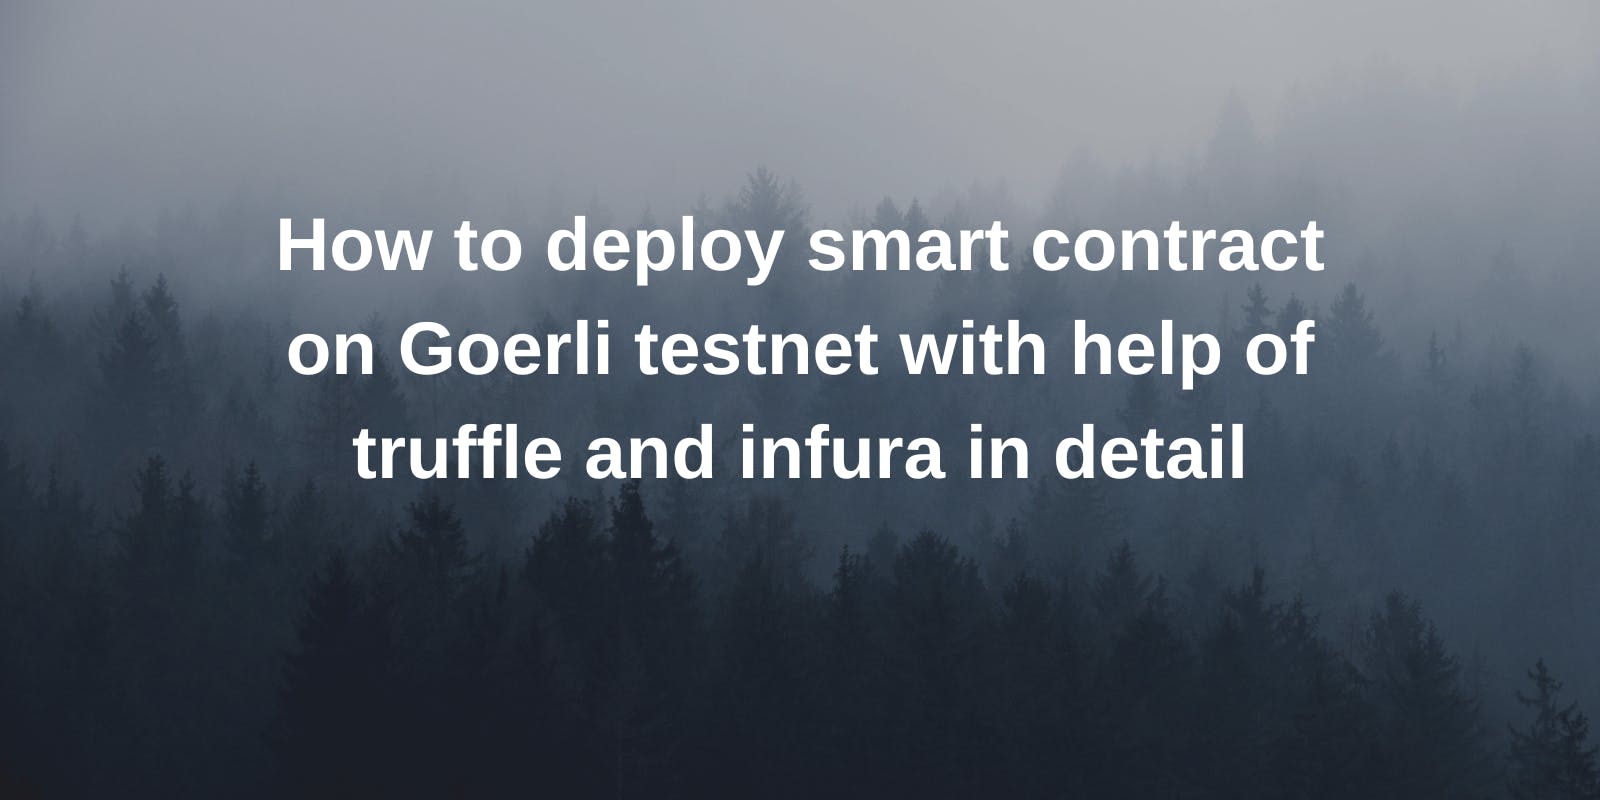 How to deploy smart contract on Goerli testnet with help of truffle and infura in detail